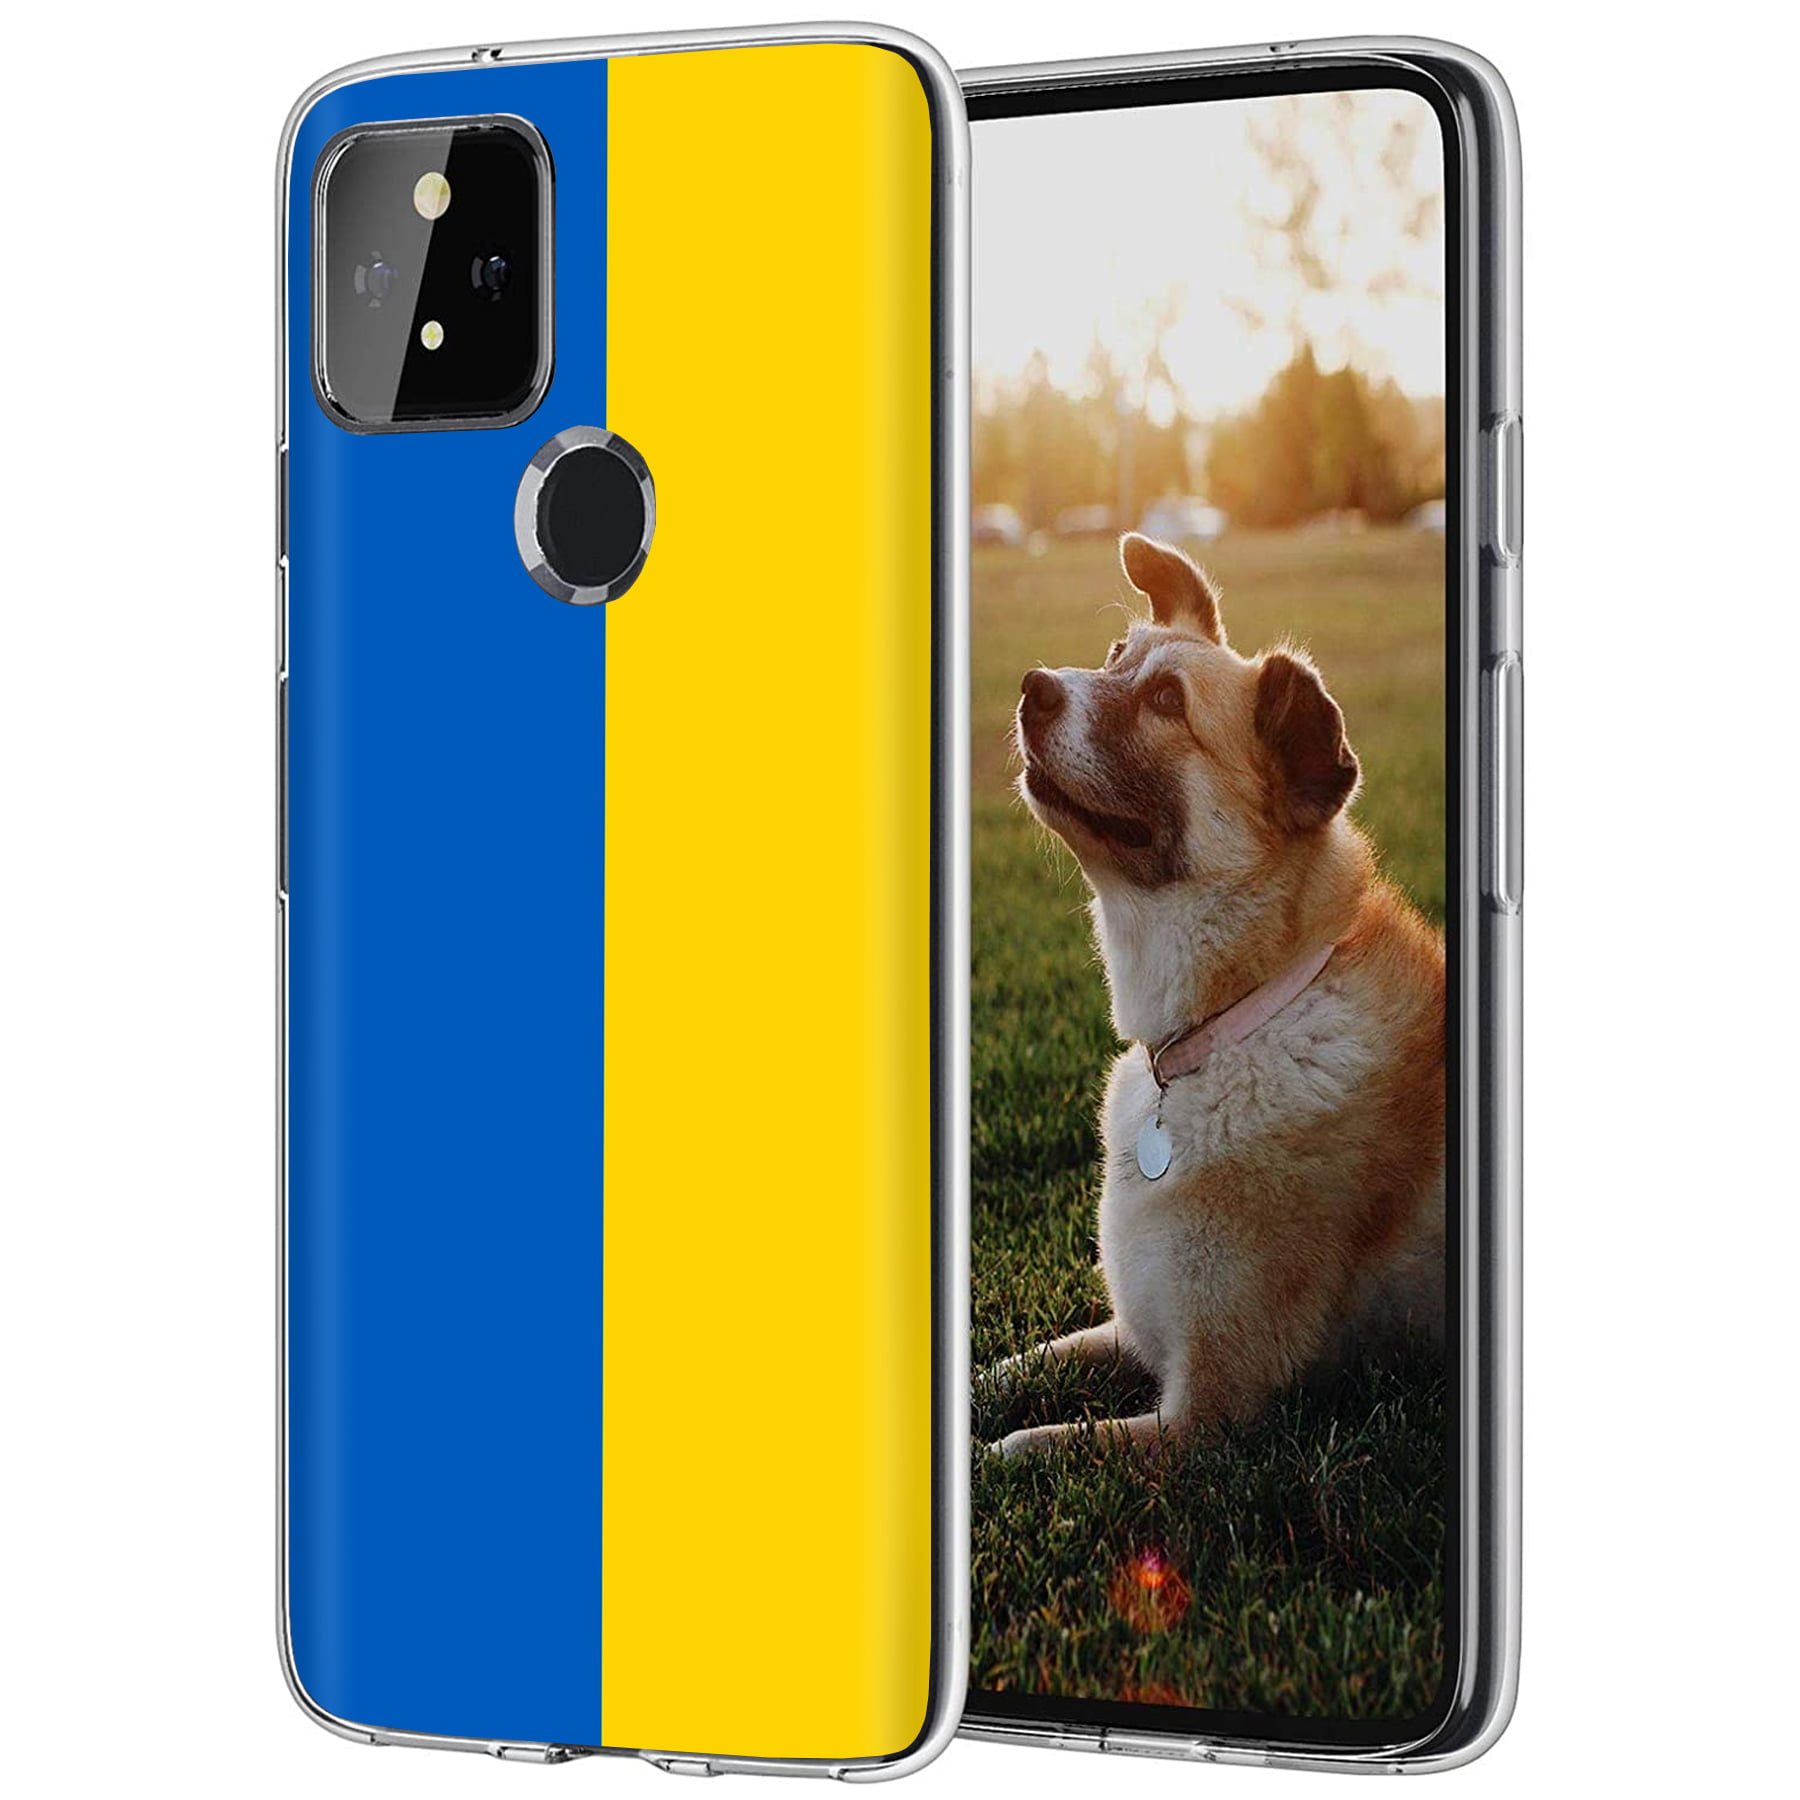 Google Pixel 3 Soft TPU Abstract Printed Cover Case 